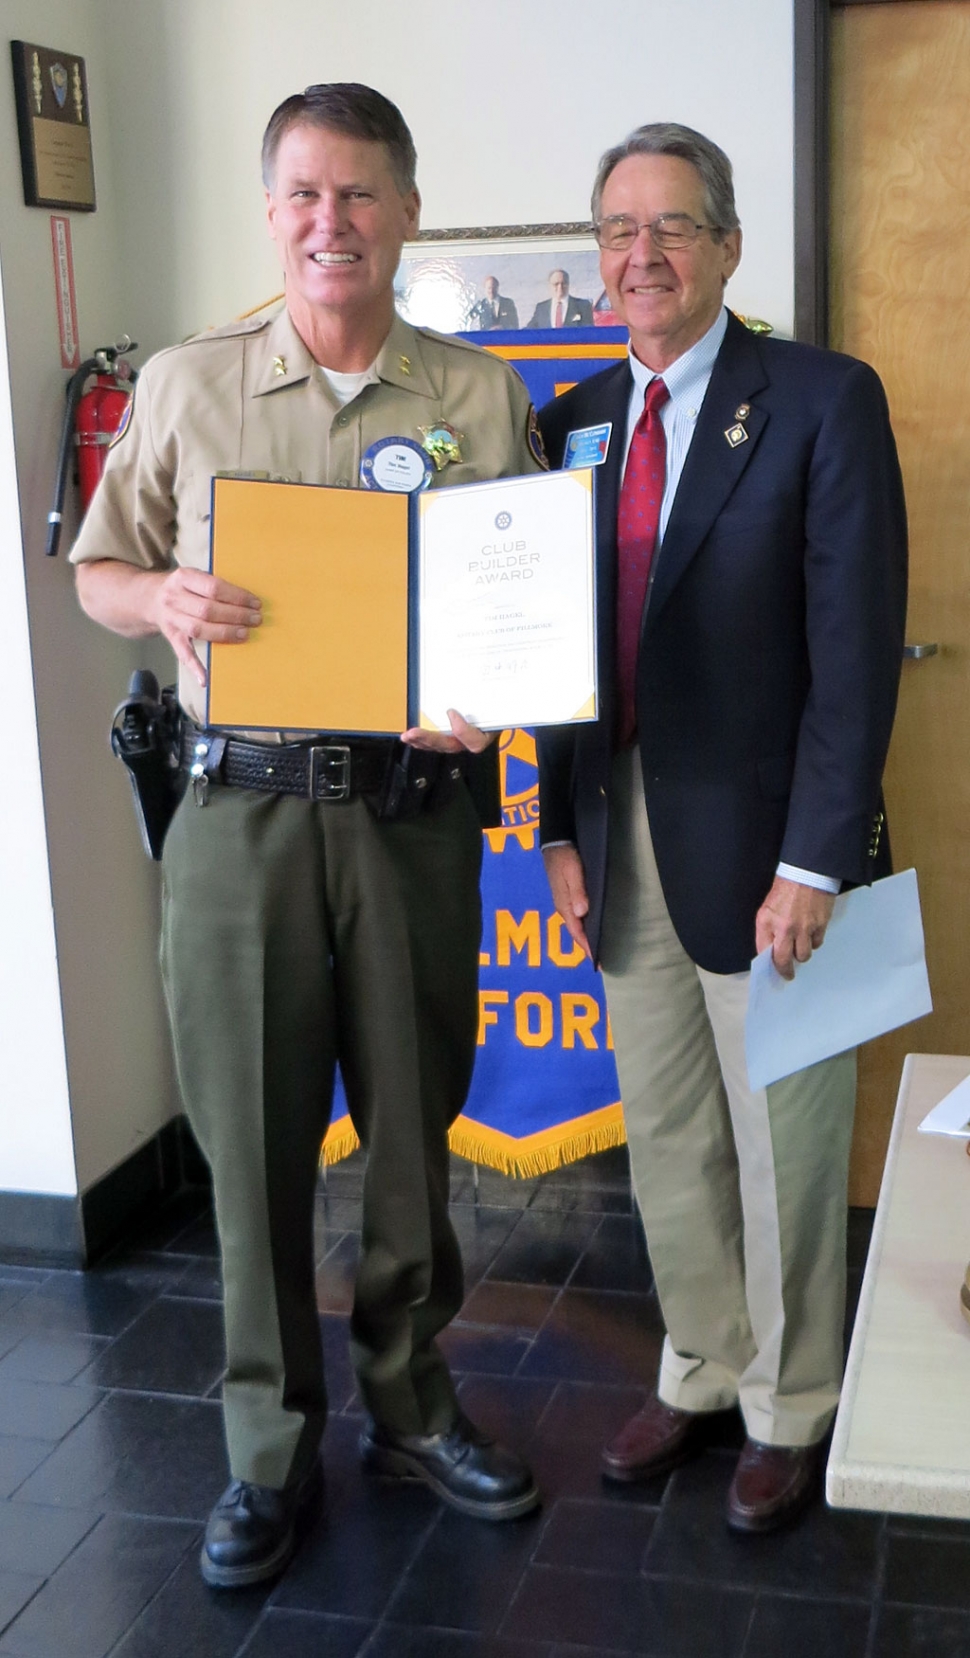 District Governor, Jack McClenahan presented Tim Hagel with the District Club Builder Award for his part in the merger of the two Fillmore Rotary Clubs.